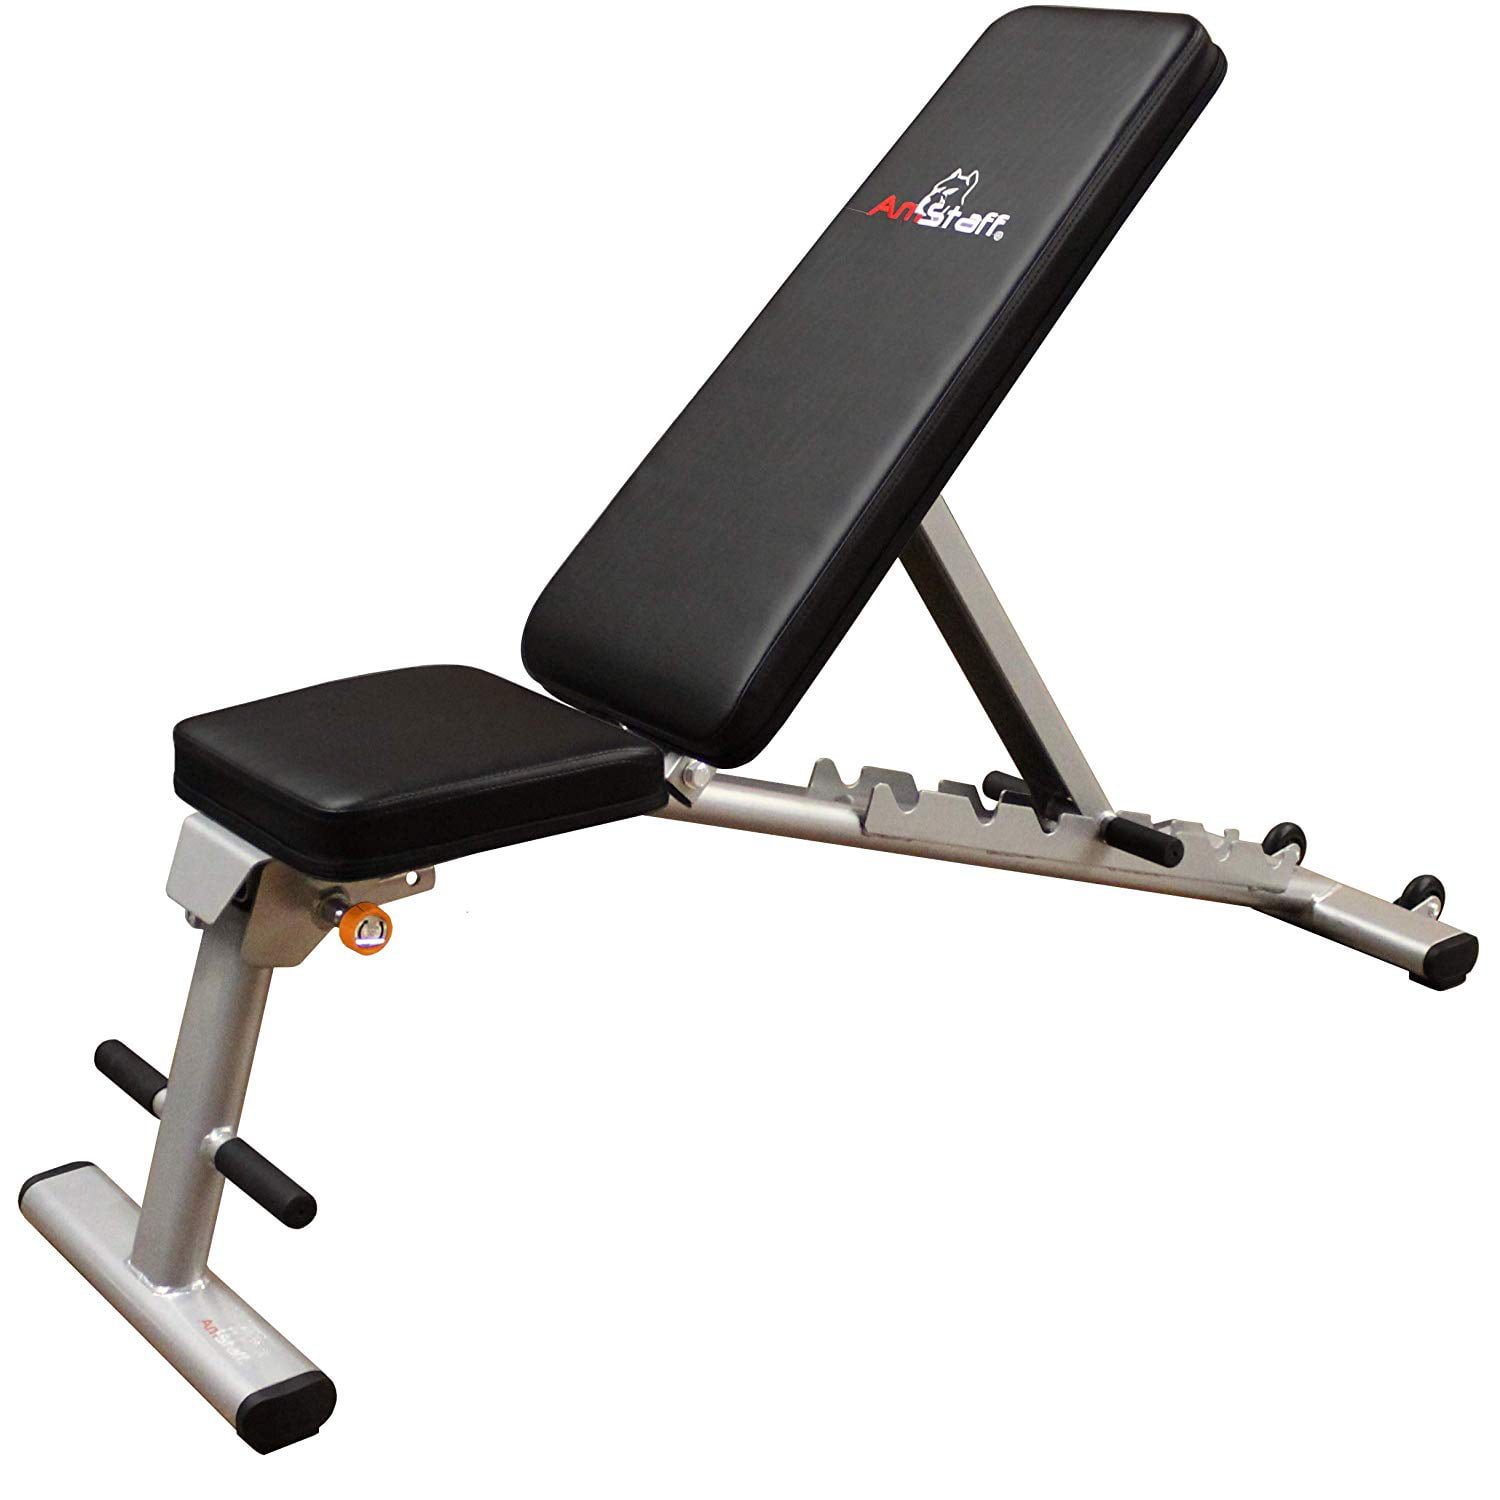  Folding Weight Bench Canada for Burn Fat fast